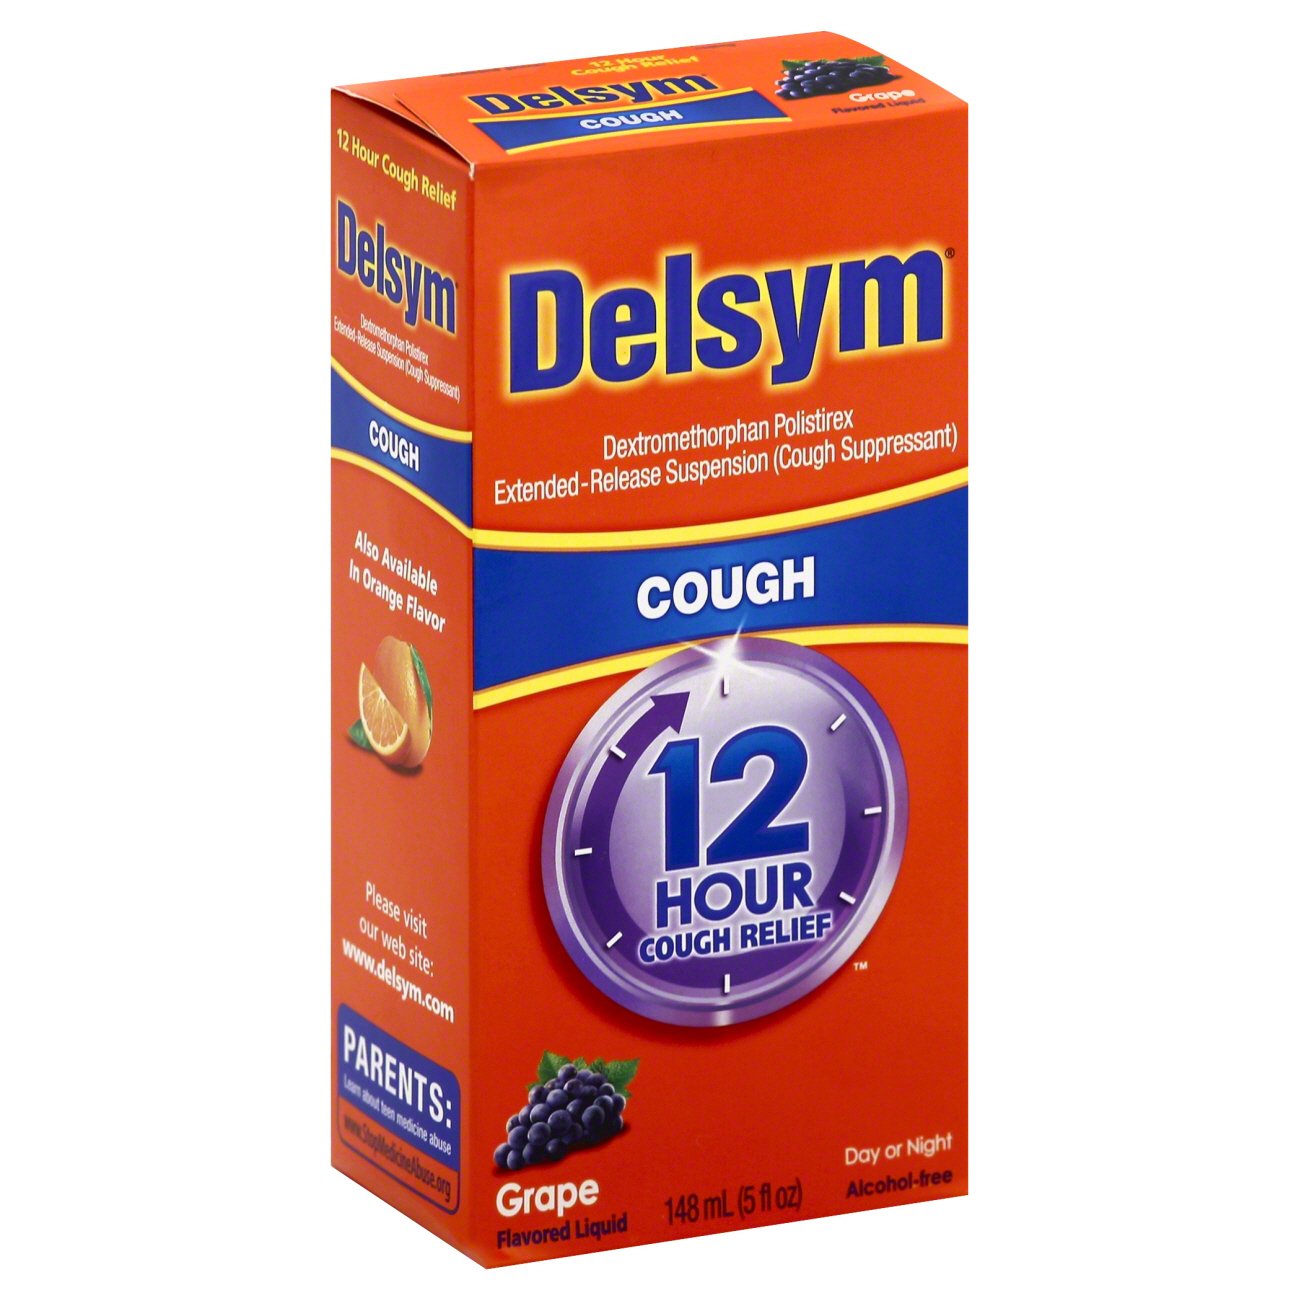 delsym-12-hour-cough-relief-day-or-night-cough-suppressant-grape